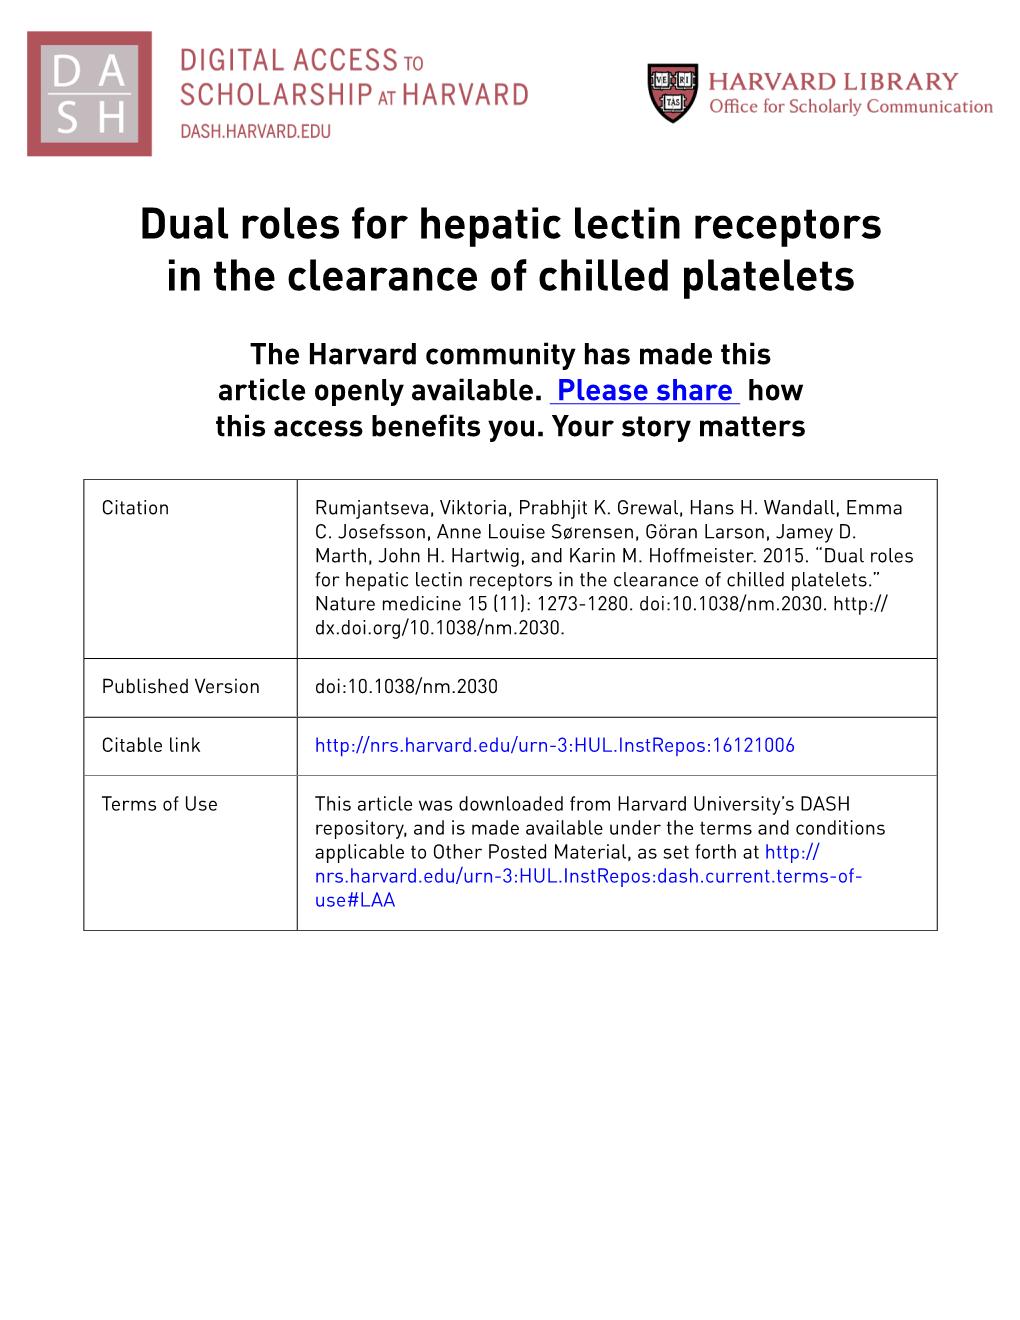 Dual Roles for Hepatic Lectin Receptors in the Clearance of Chilled Platelets